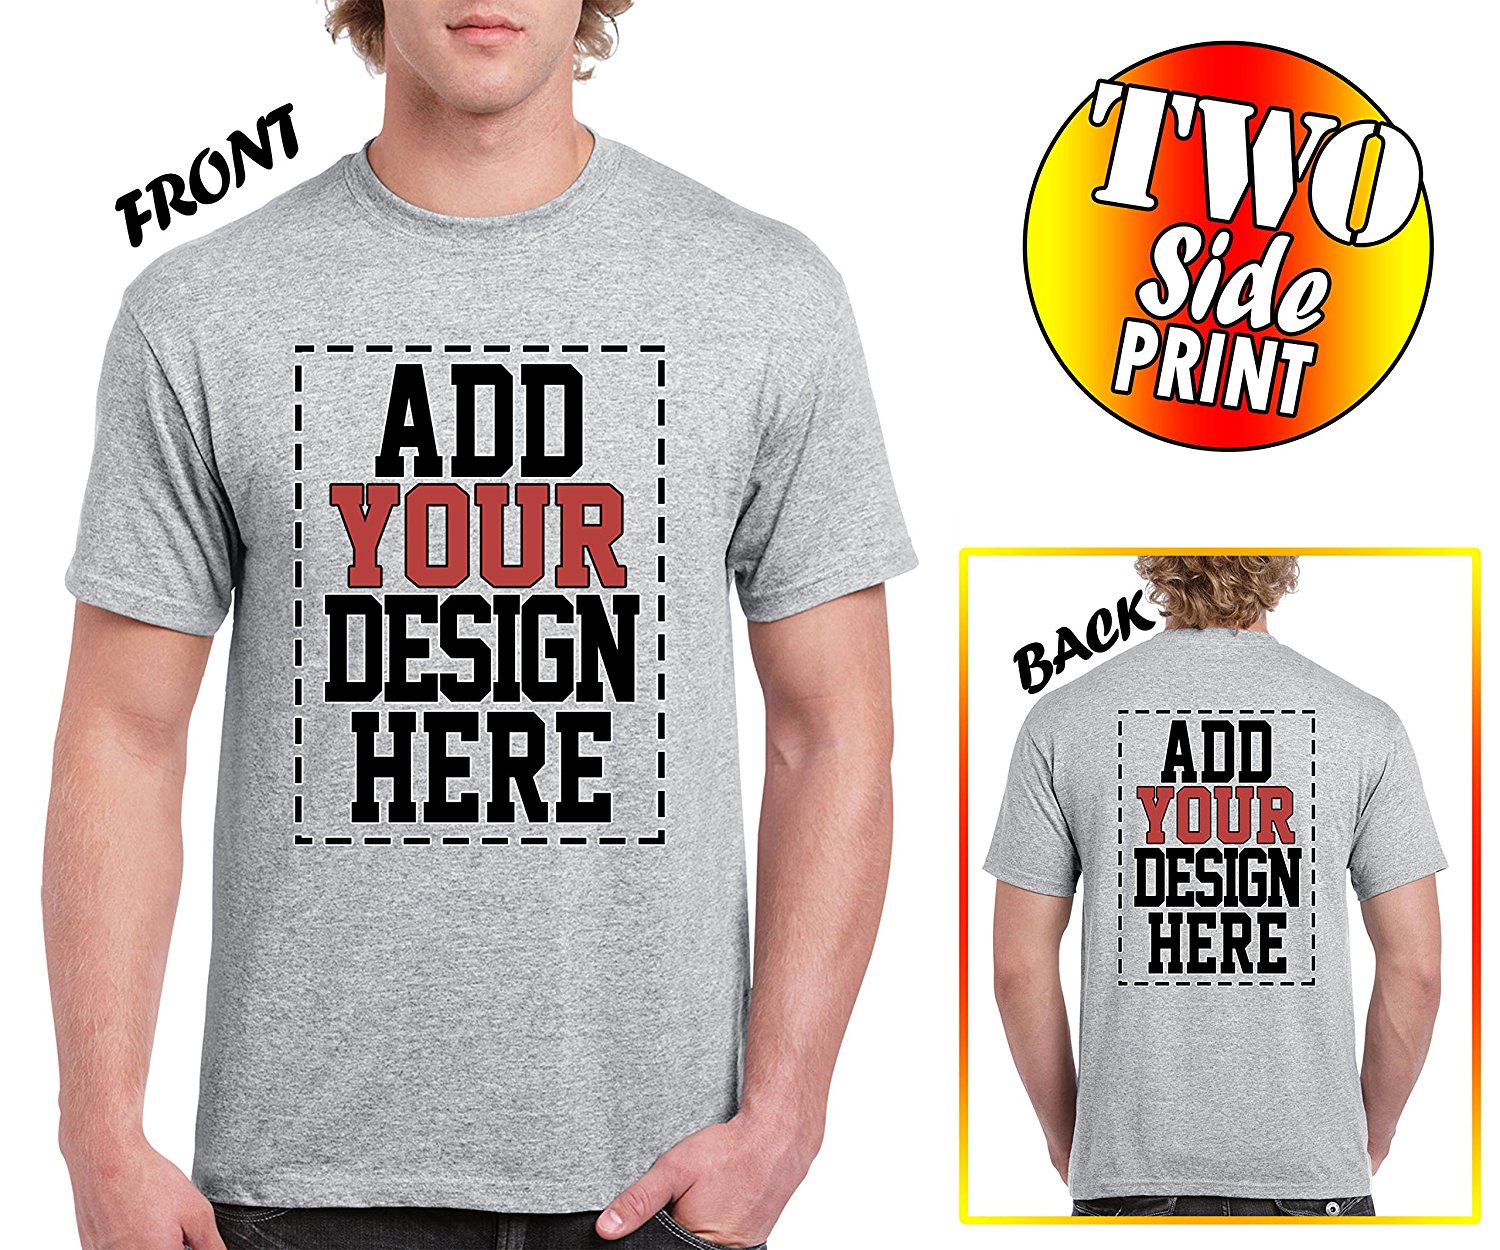 Custom 2 sided T-Shirts - DESIGN YOUR OWN SHIRT - FRONT and BACK Printing on Shirts